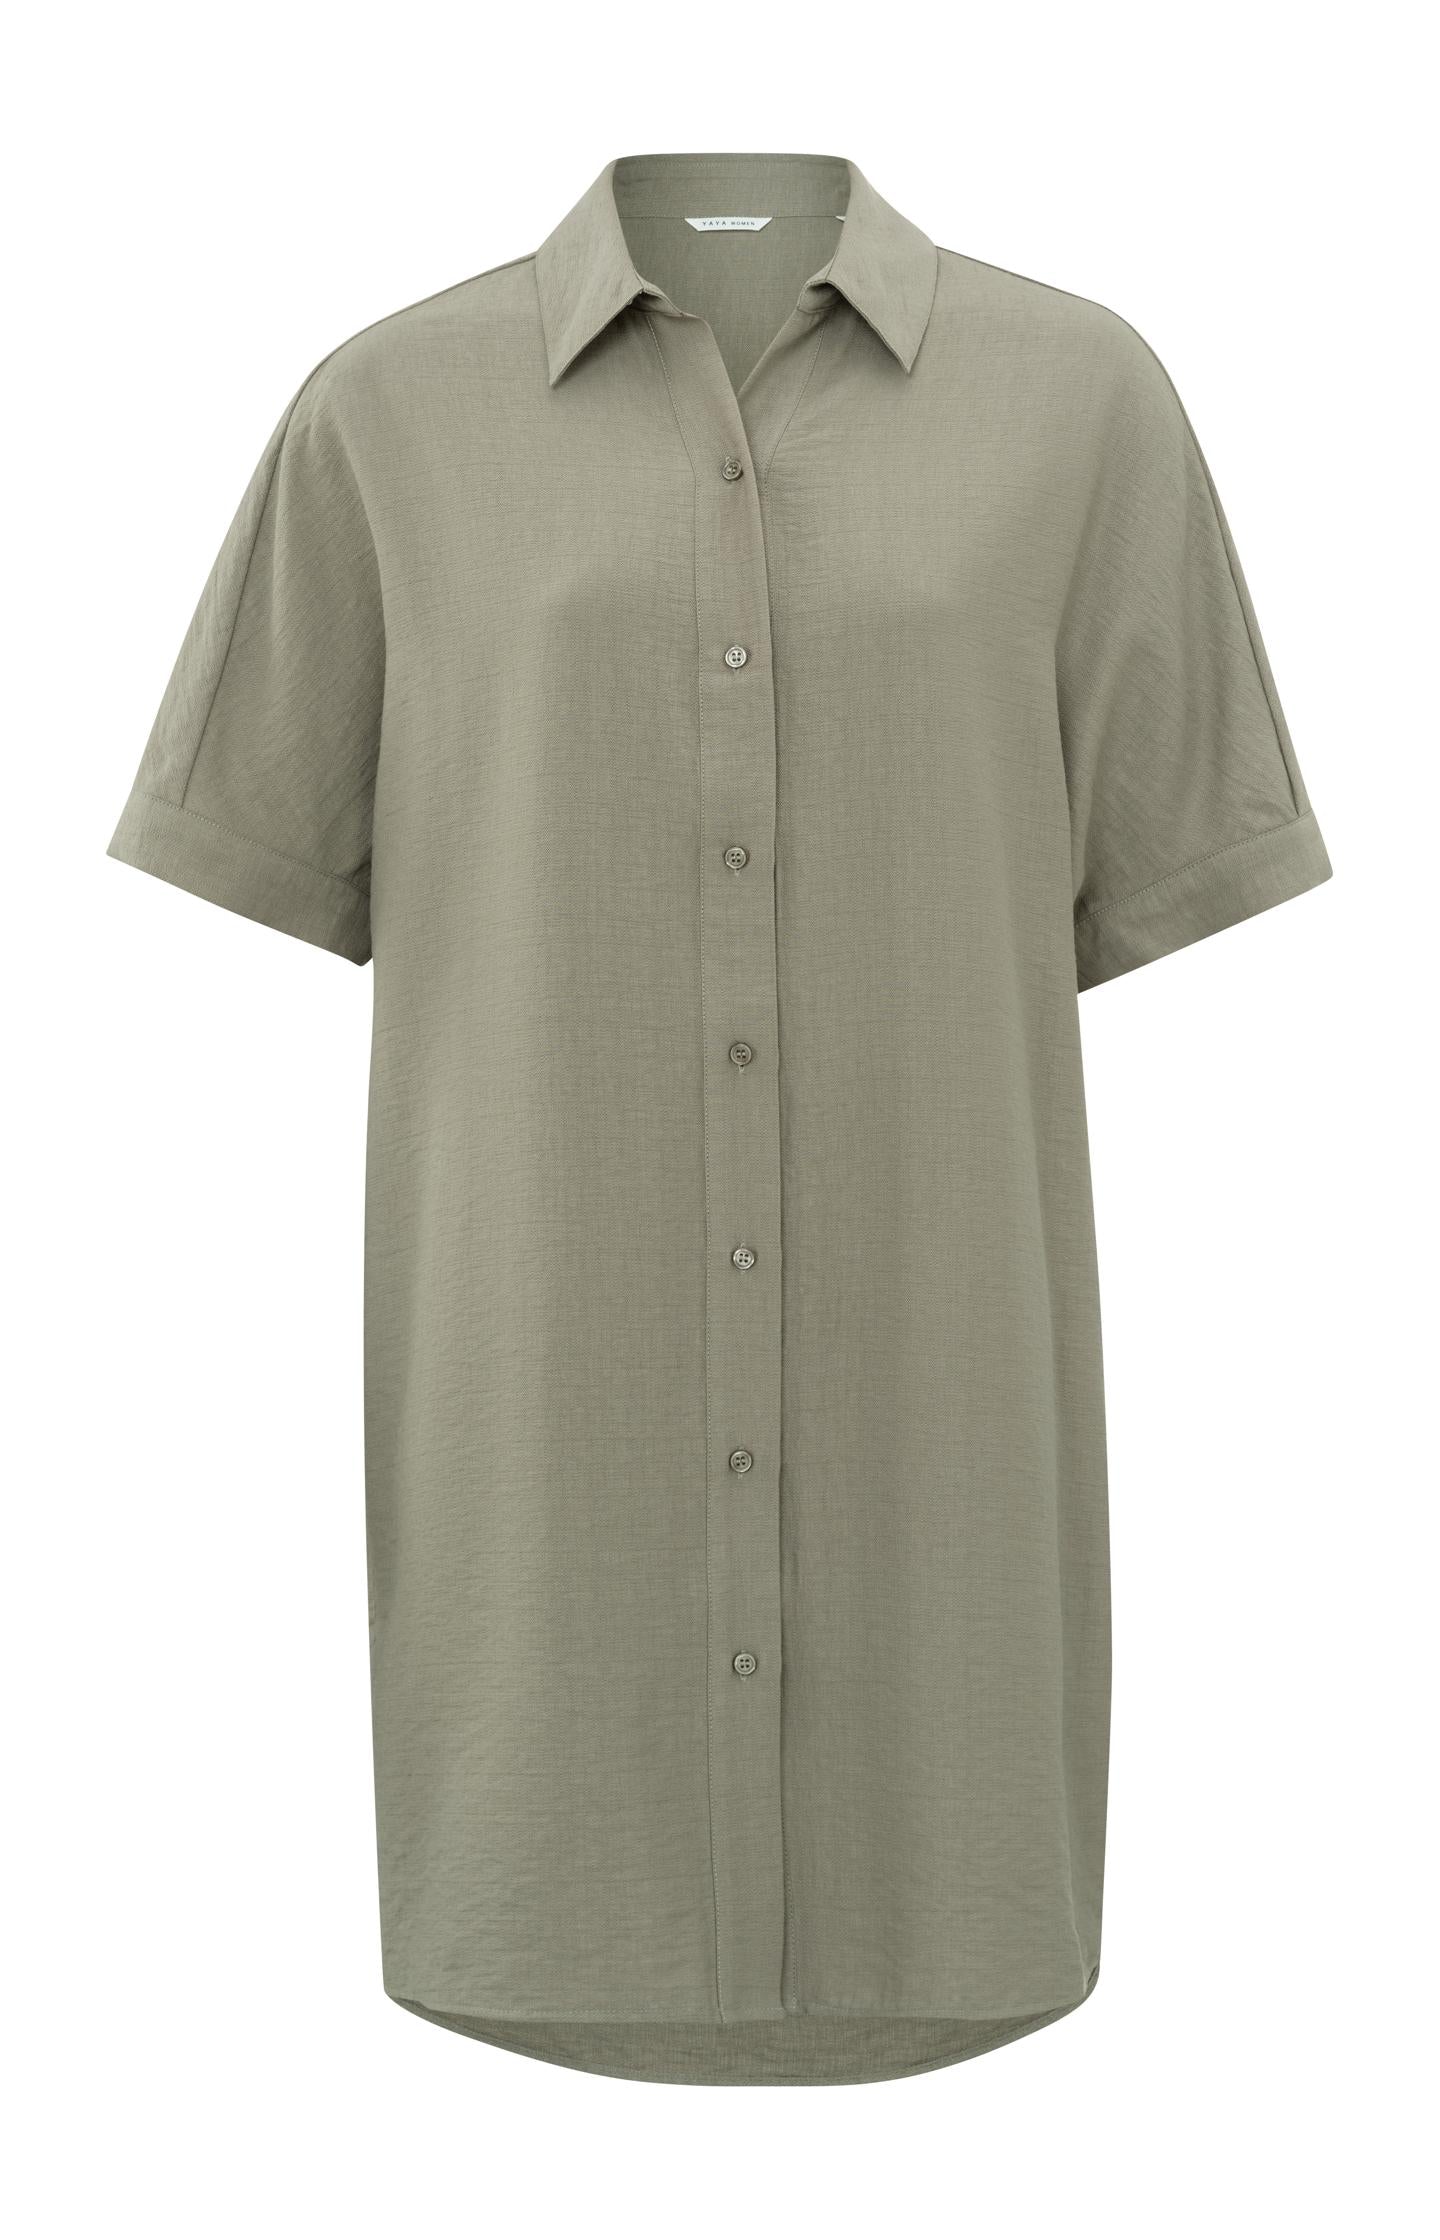 Shirt dress with short sleeves, buttons and collar - Type: product